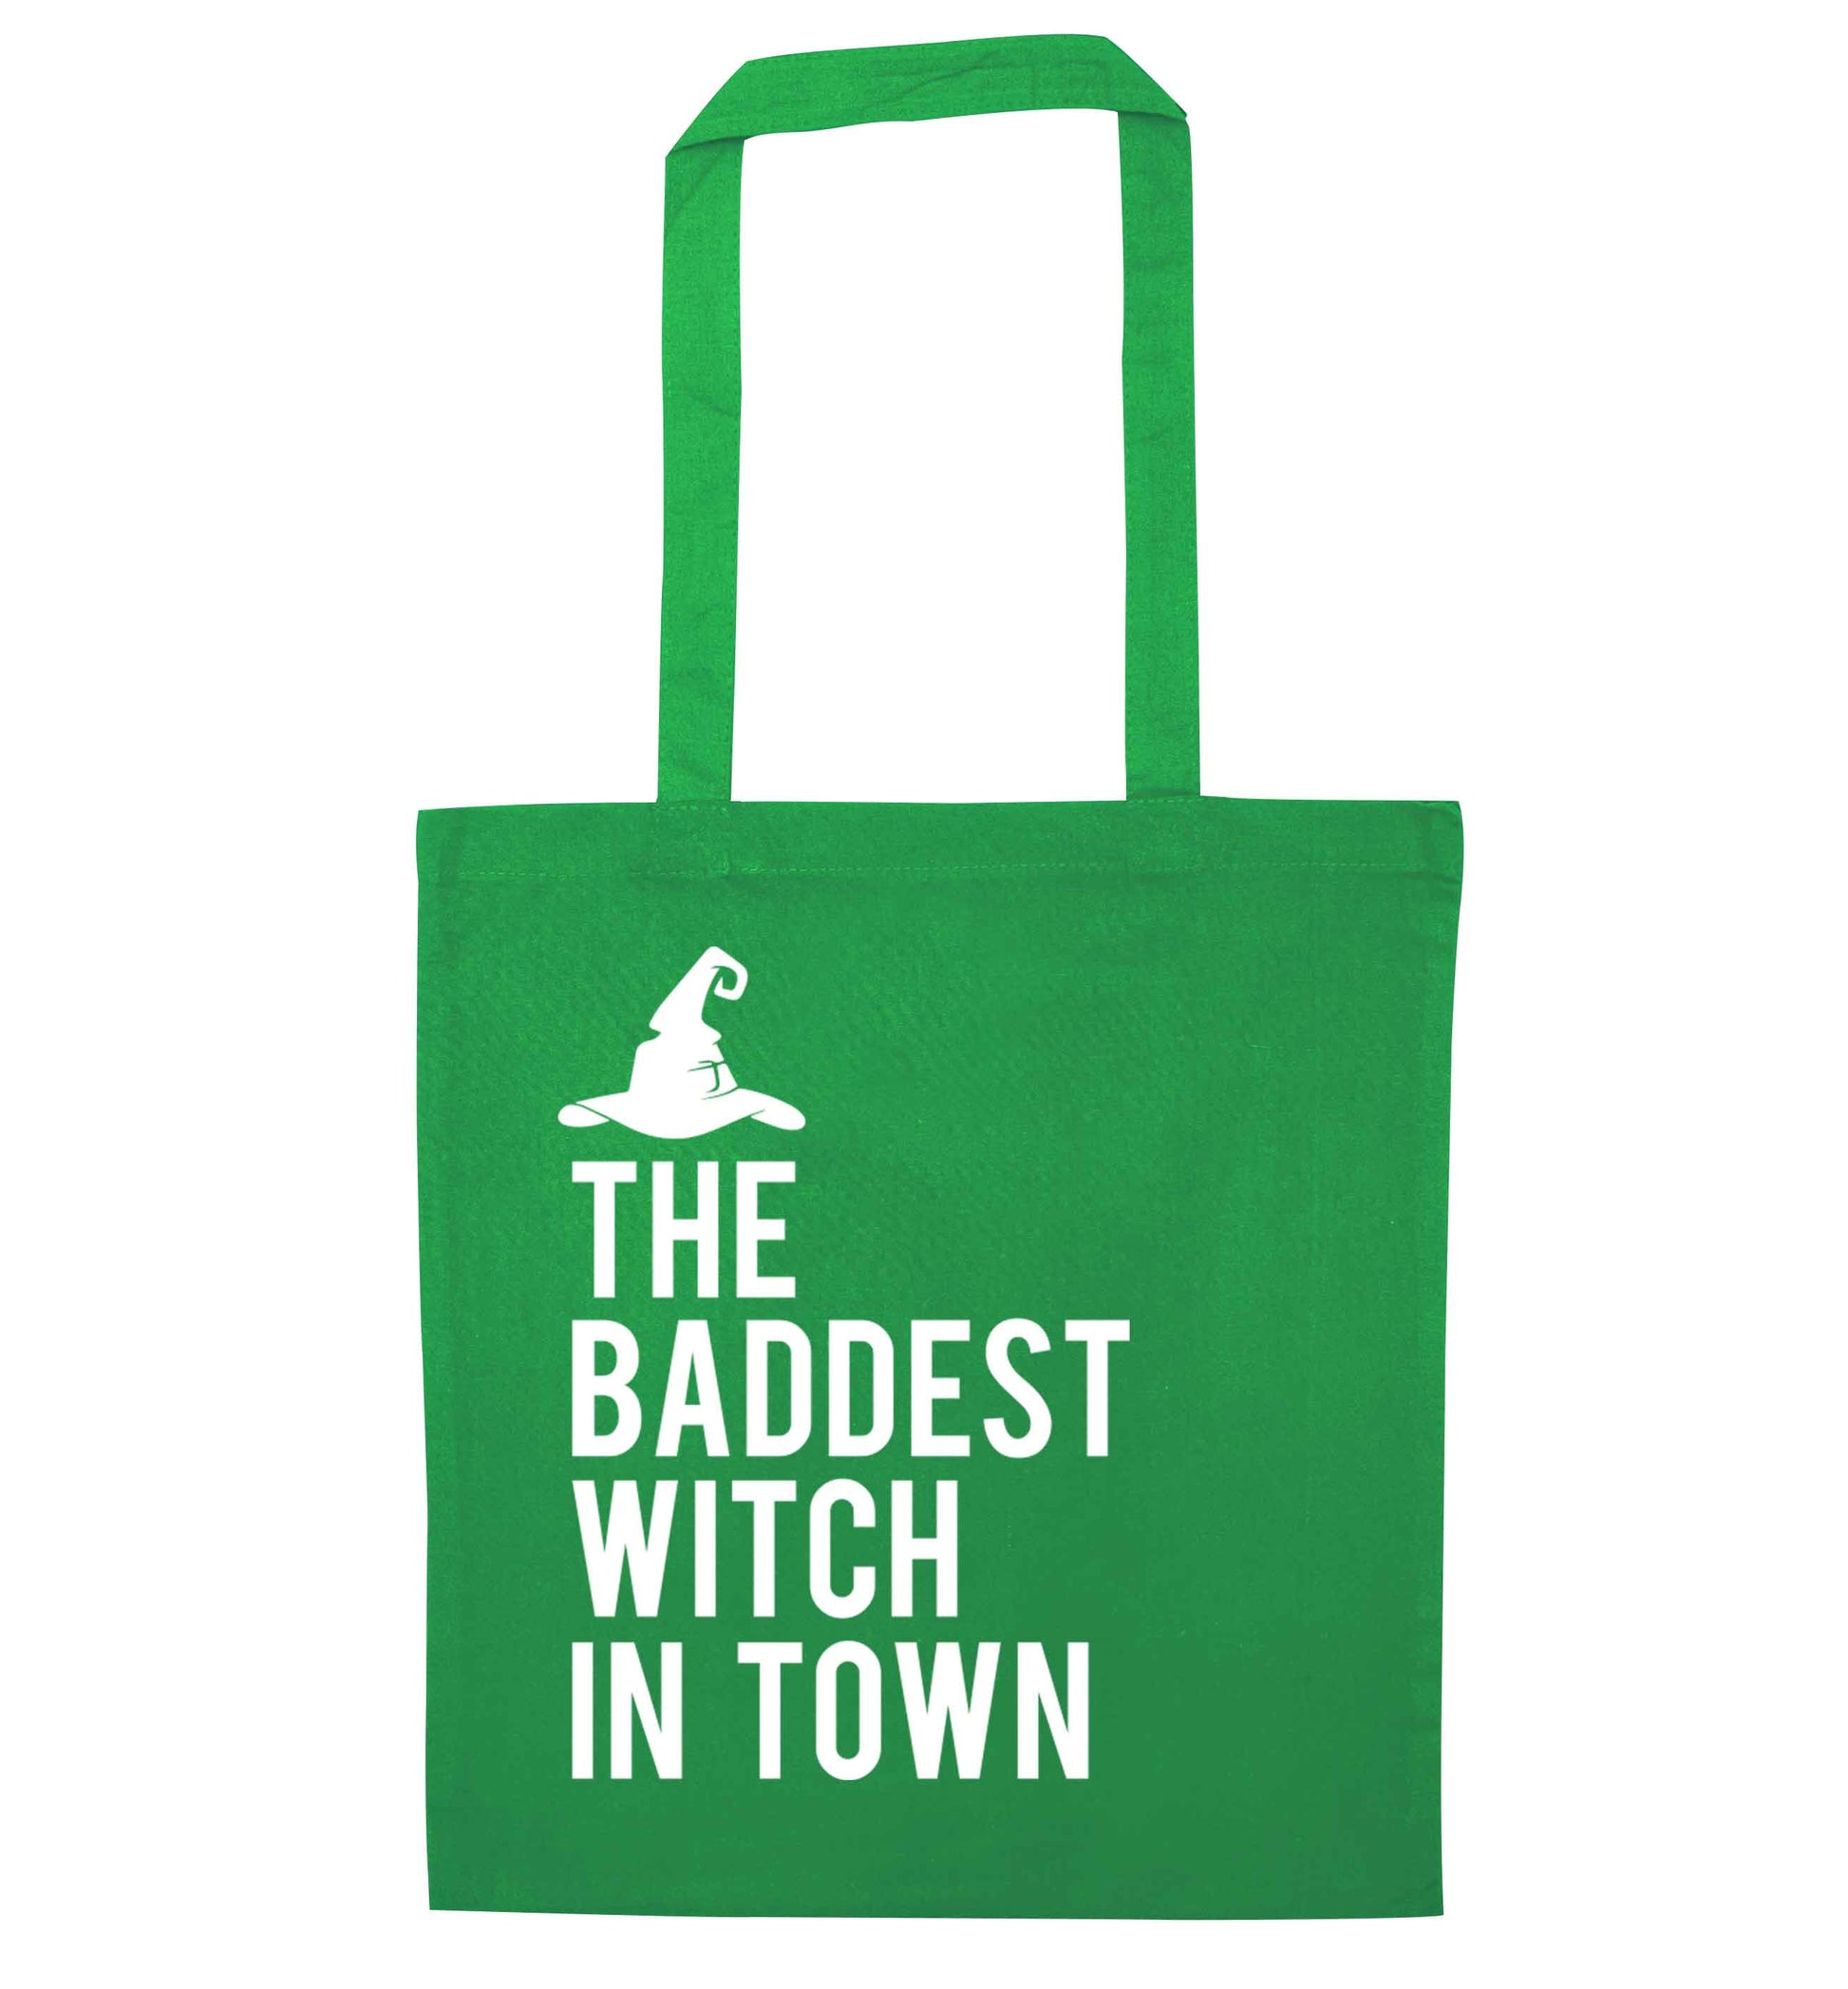 Badest witch in town green tote bag